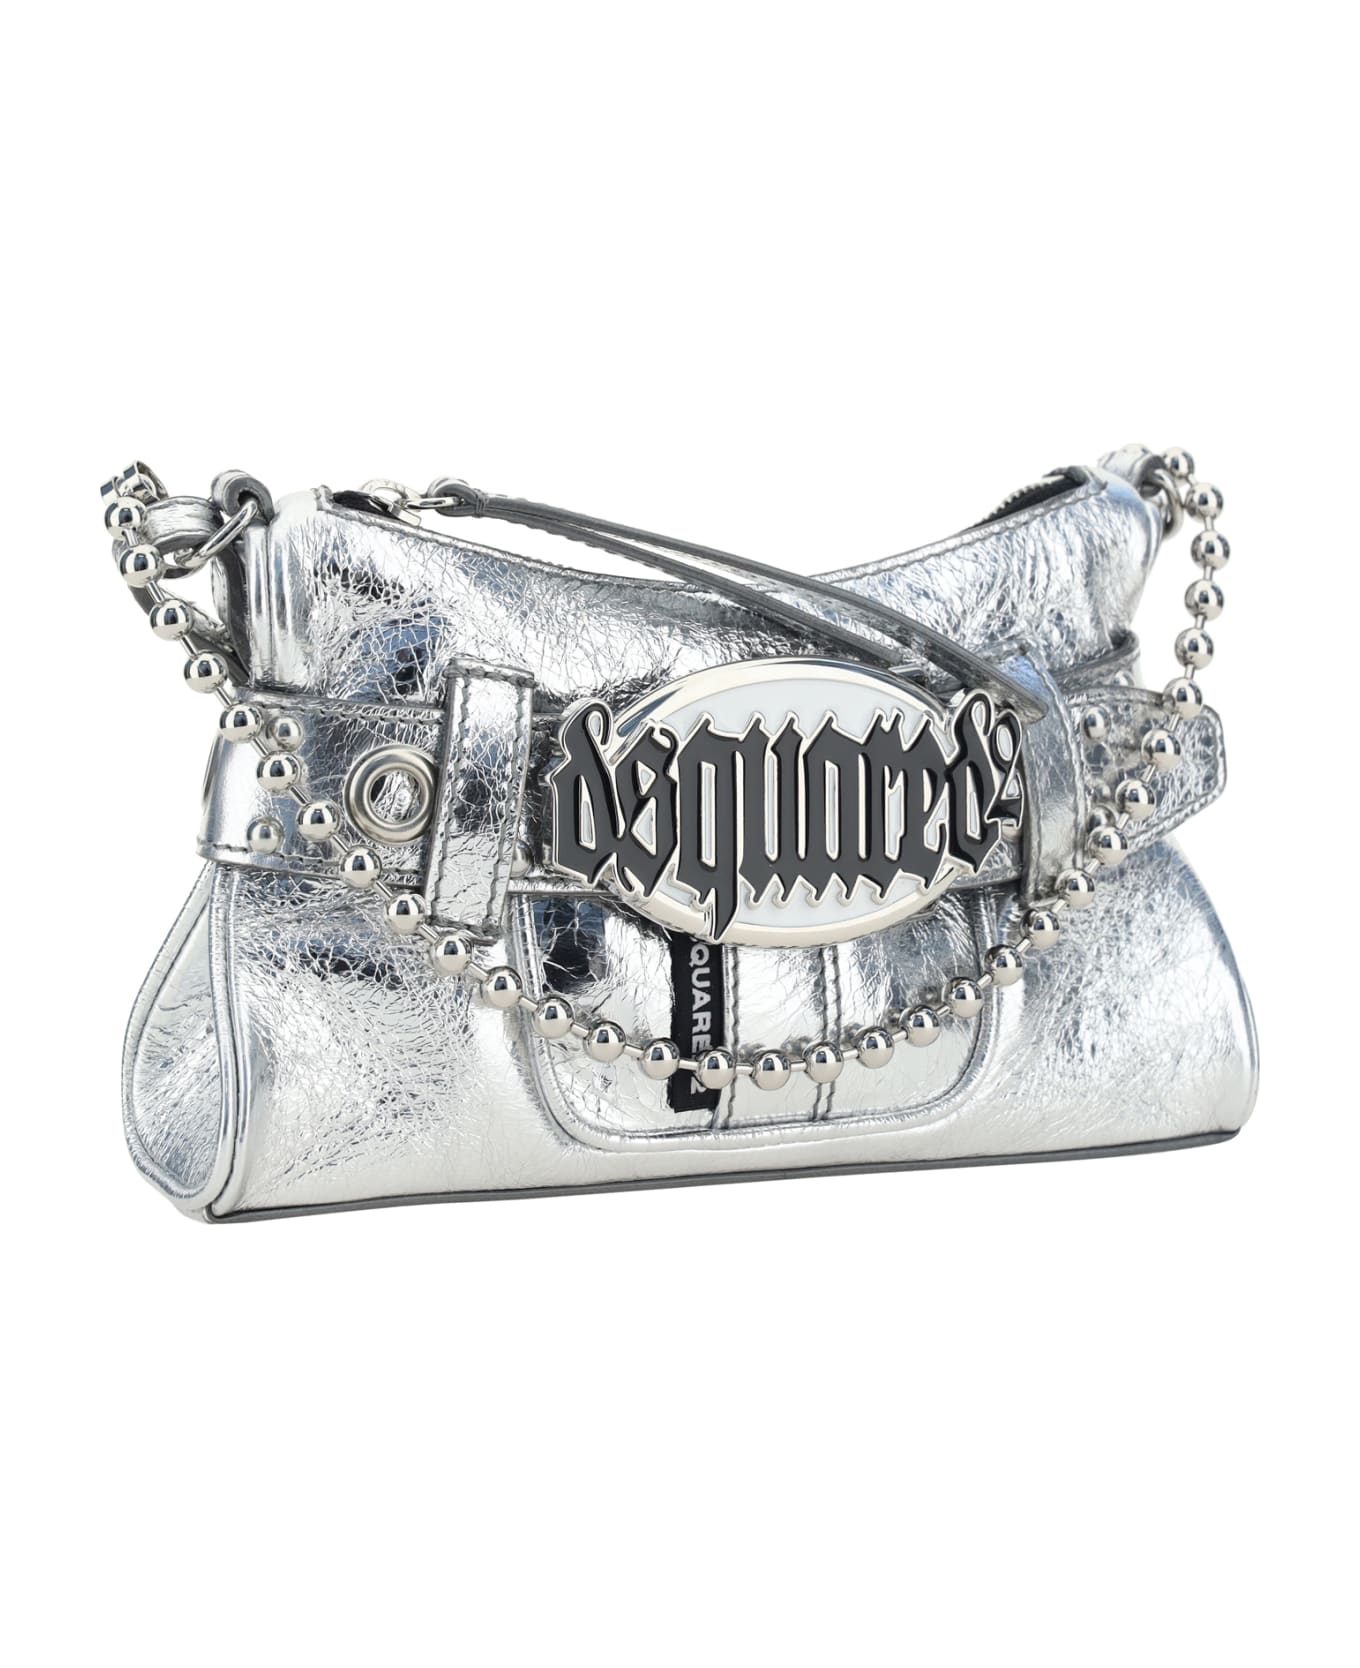 Dsquared2 'gothic Dsquared2' Clutch - Argento